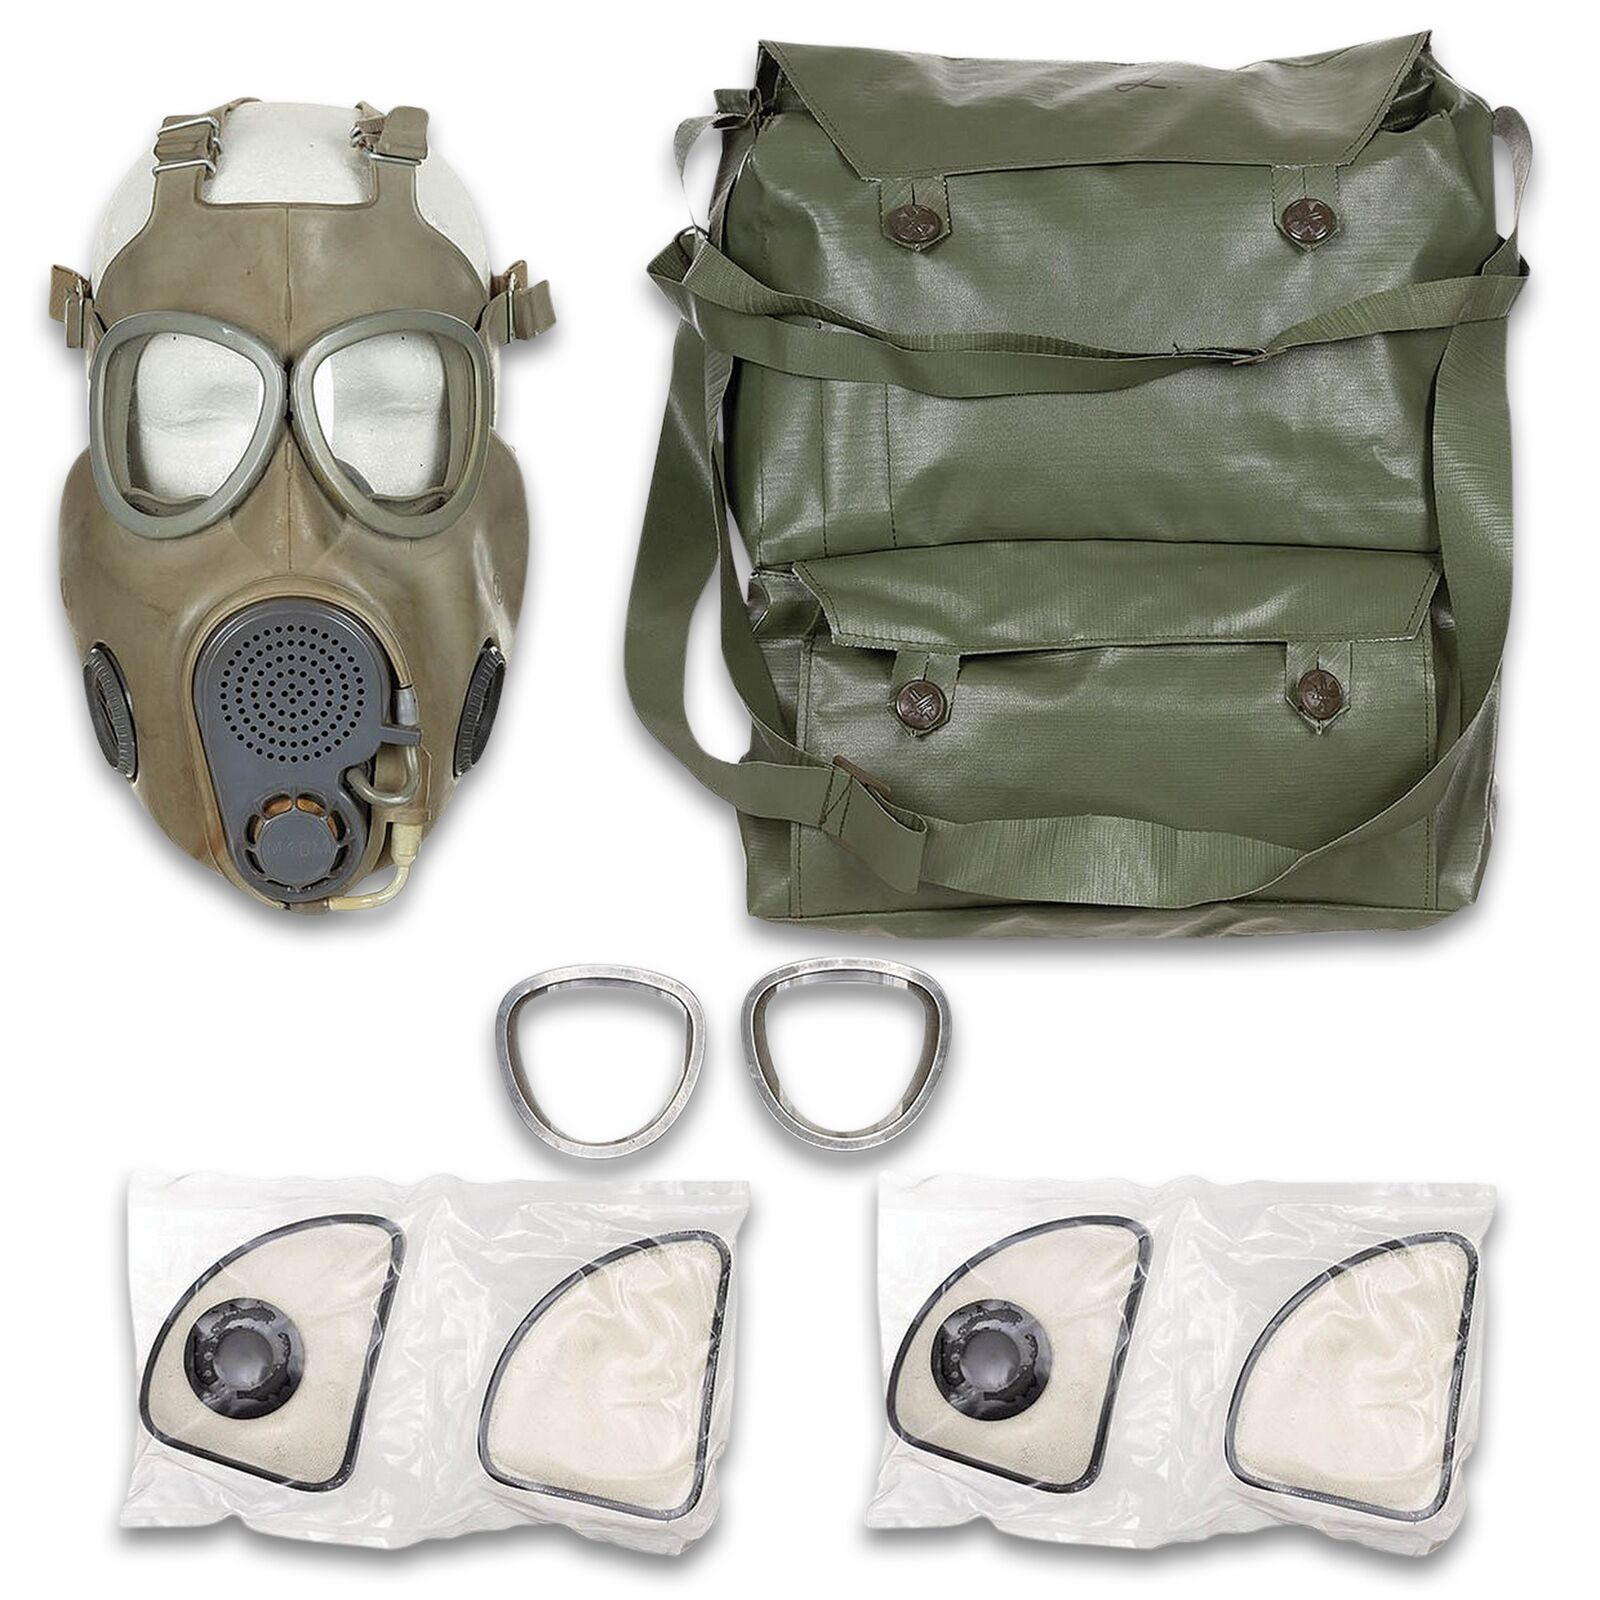 New Czech Military M10 NBC Full Face Gas Mask w/Drinking Tube, Bag, Spare Filter